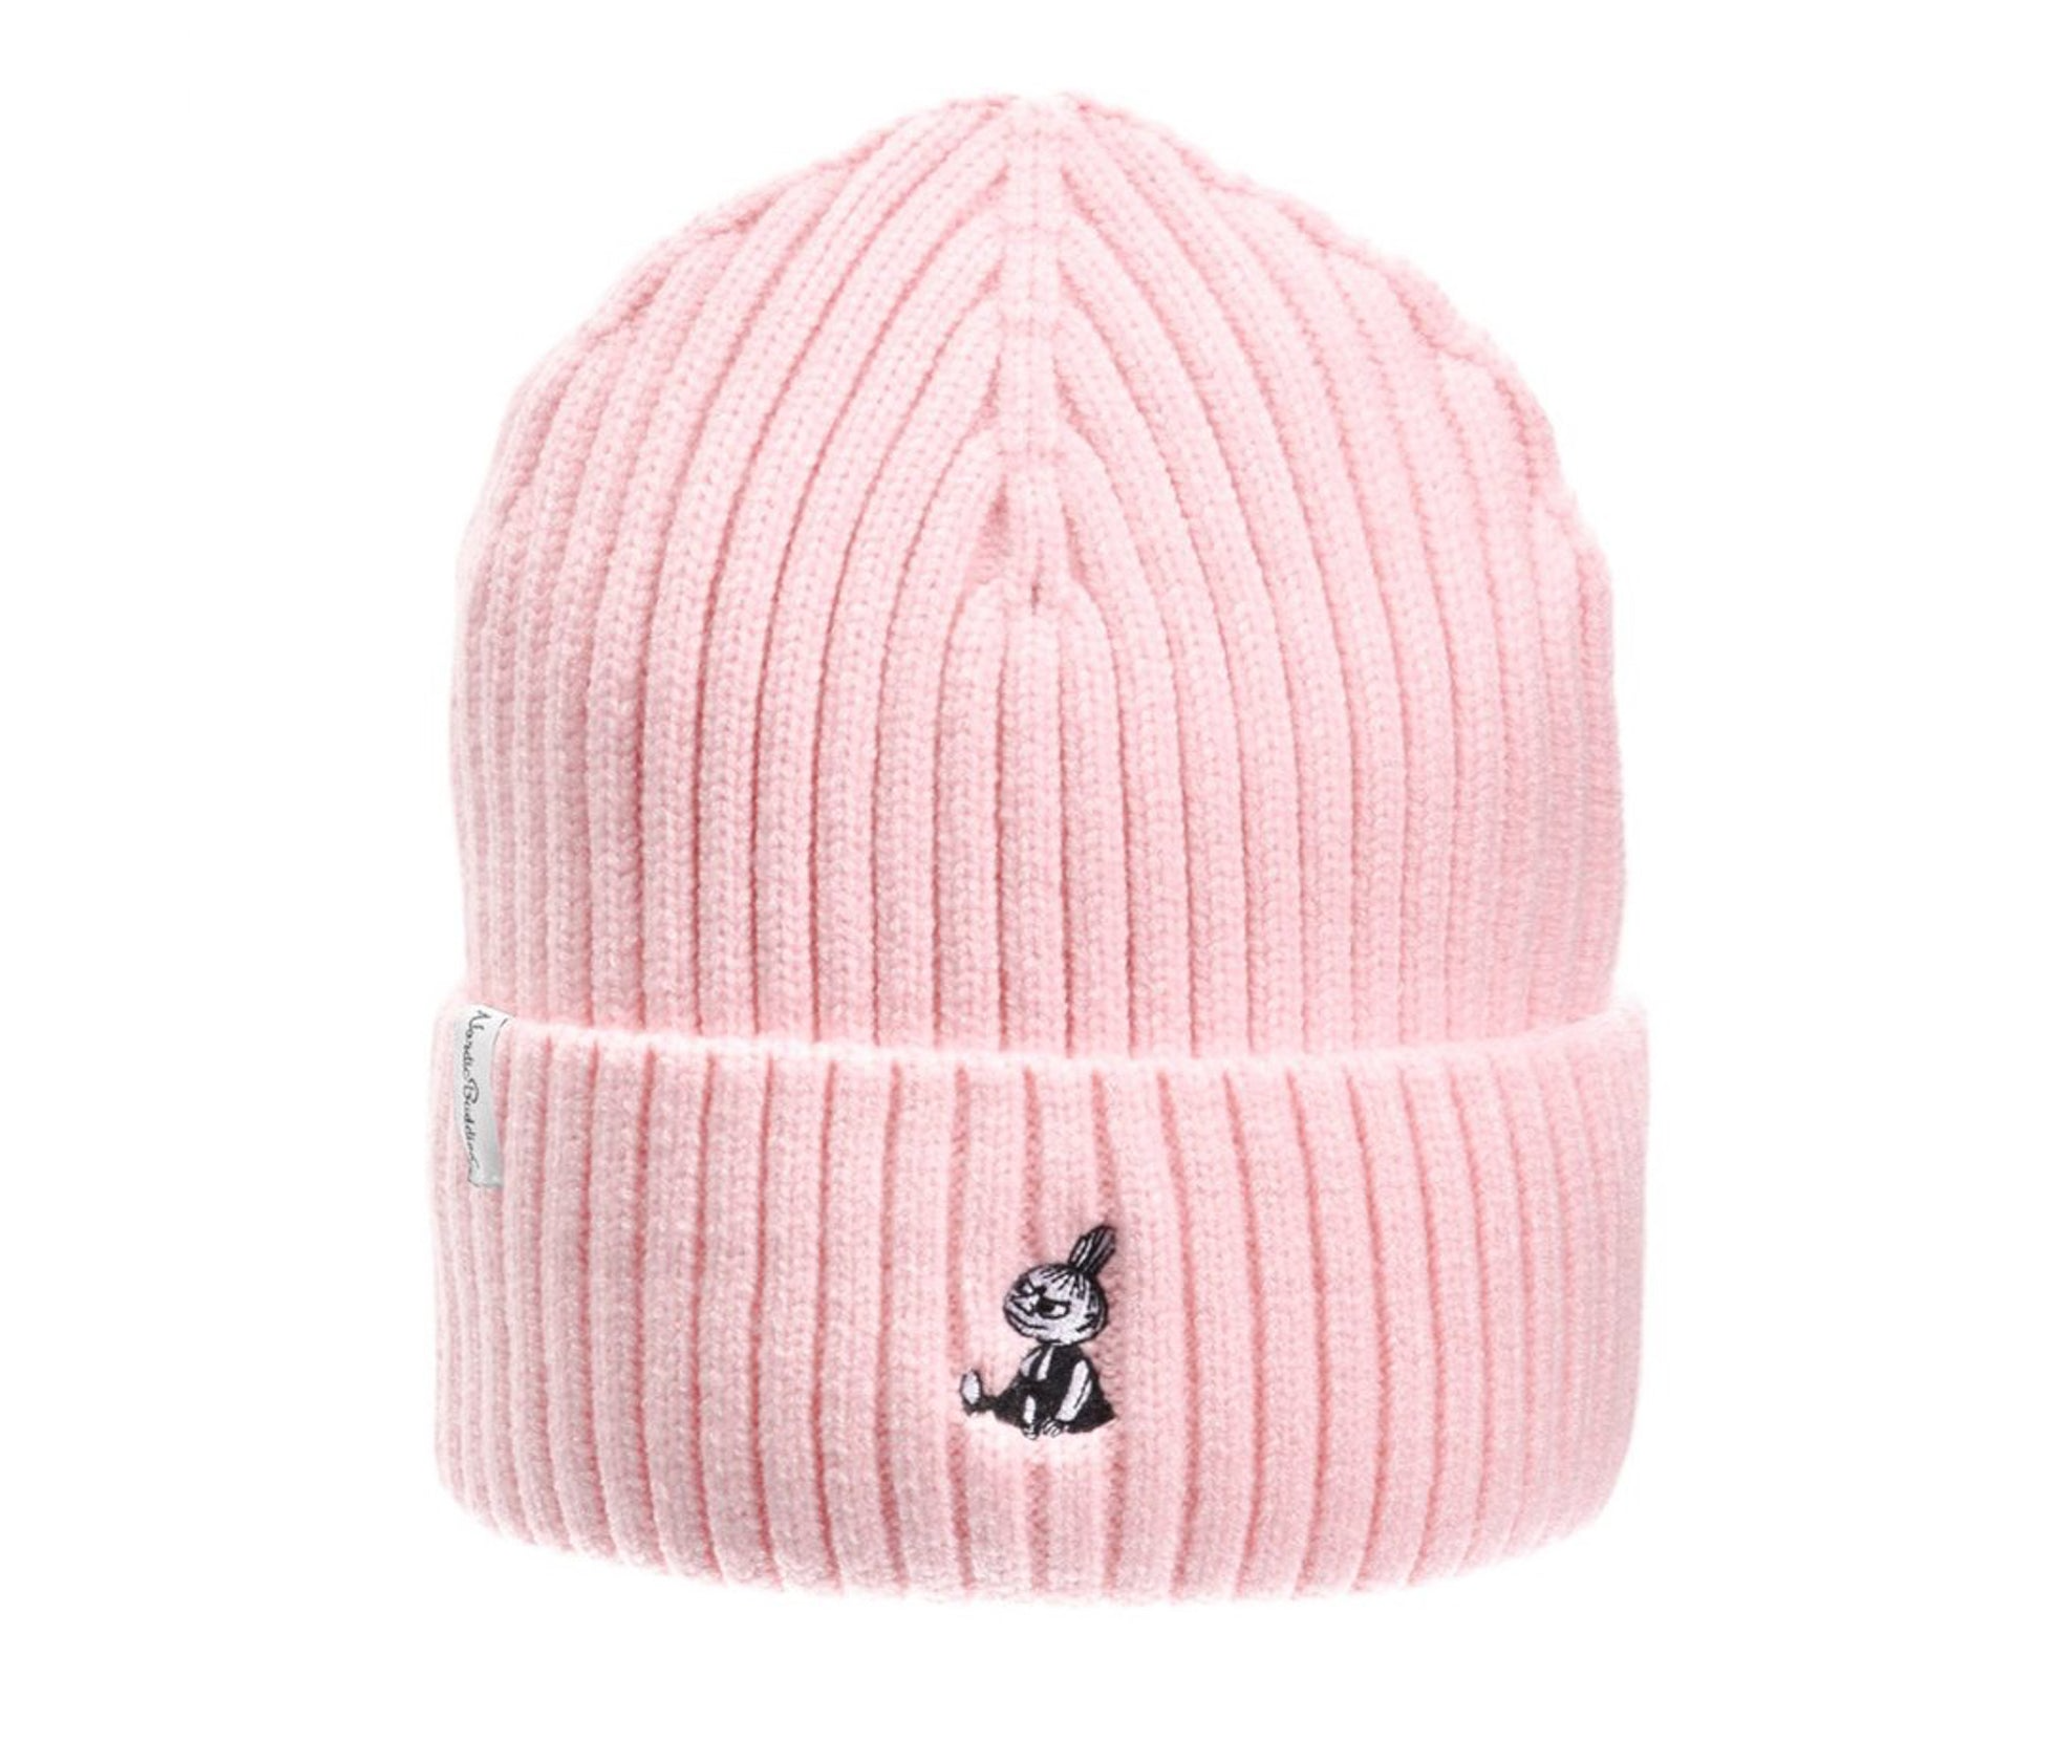 [Moomin] Little My Winter Embroidery Beanie Pink